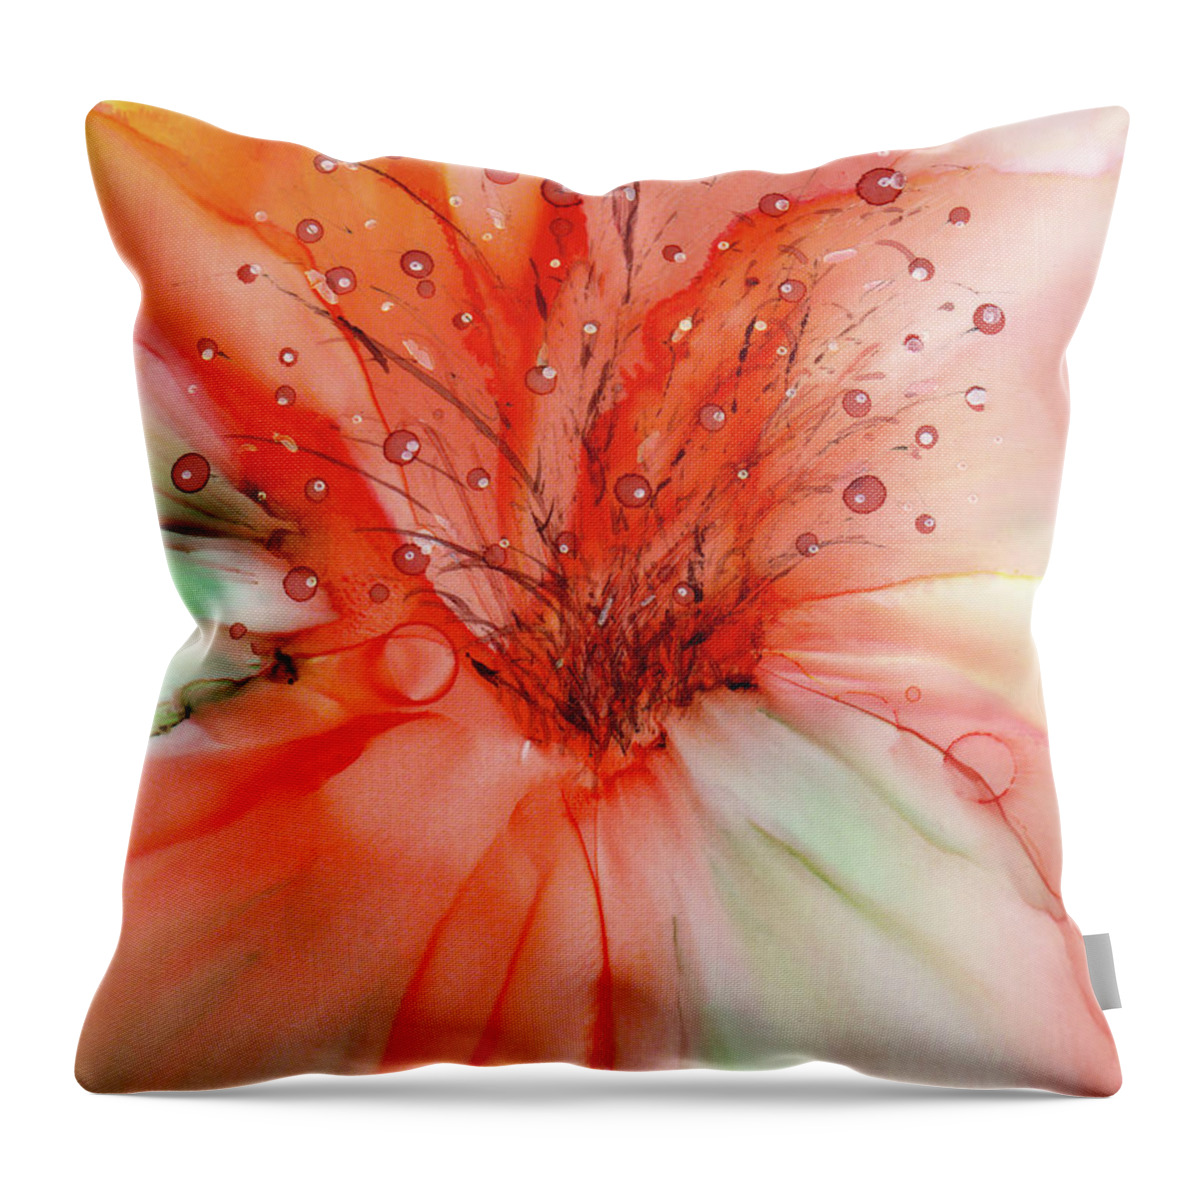 Beautiful Floral Painting In Orange Hues With Detailed Center. Lots Of Energy And Movement In The Piece! Original Painting Was Done In Vibrant Alcohol Ink Which Has A Wonderful Organic Flow. Throw Pillow featuring the painting Tangerine Bloom by Kimberly Deene Langlois